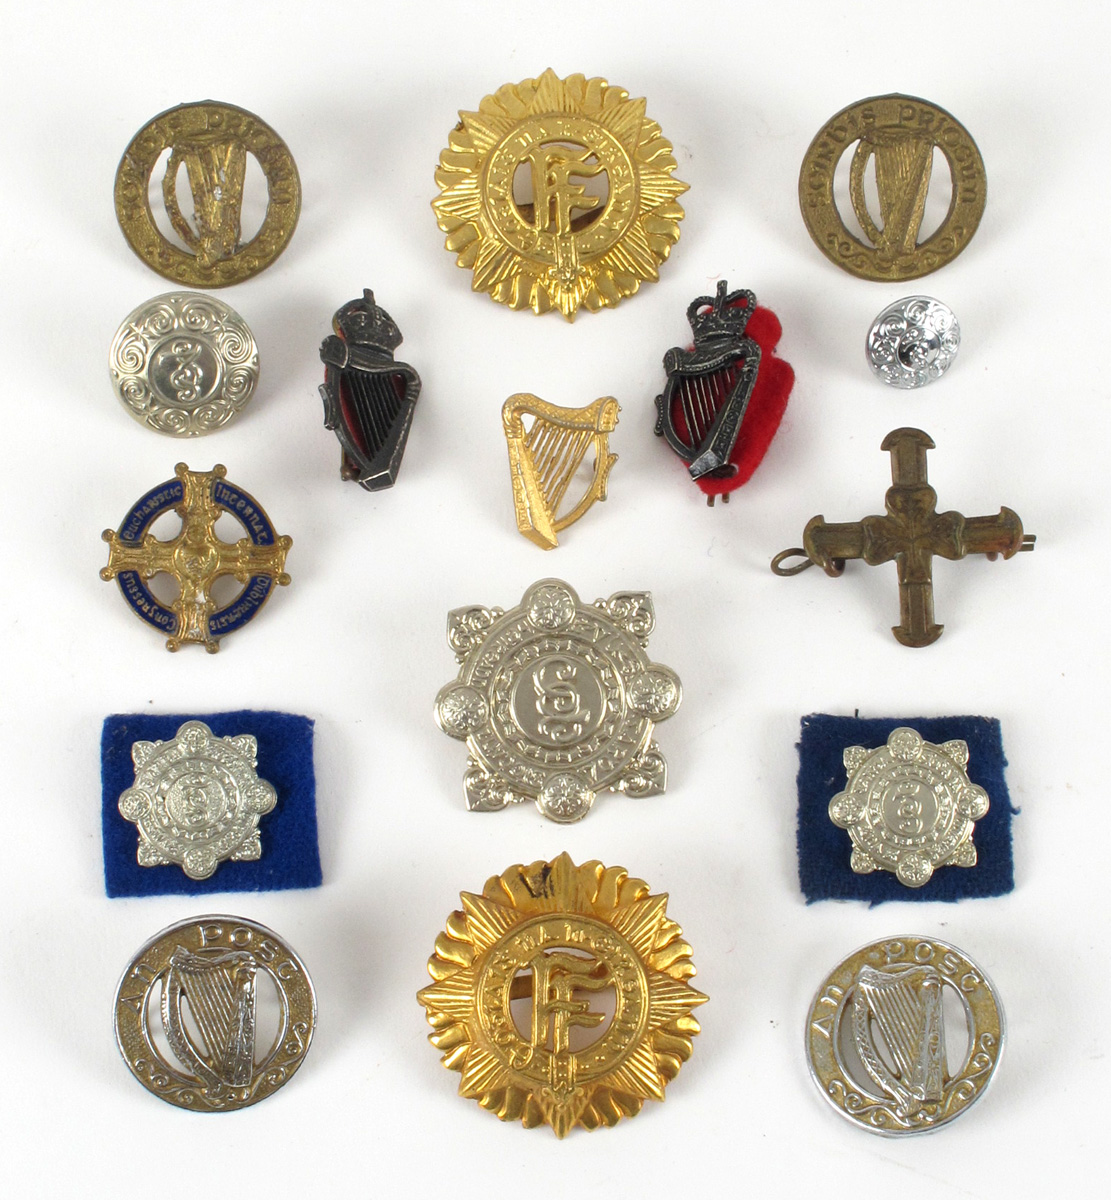 Two Oglaigh na hEireann gilt cap badges at Whyte's Auctions